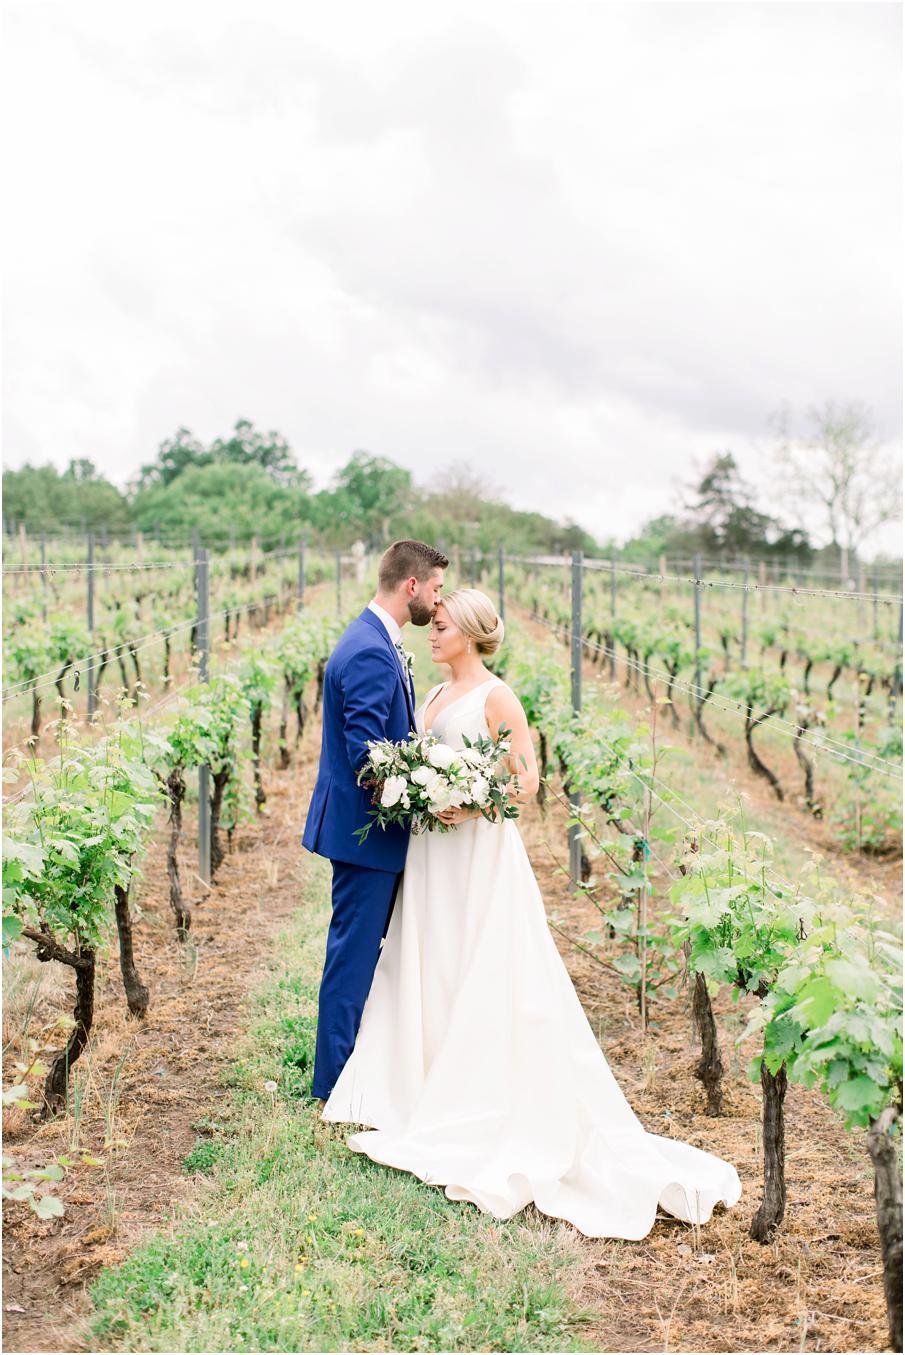 Bride and groom sharing a moment in the grape vines at their Morais Vineyards Wedding